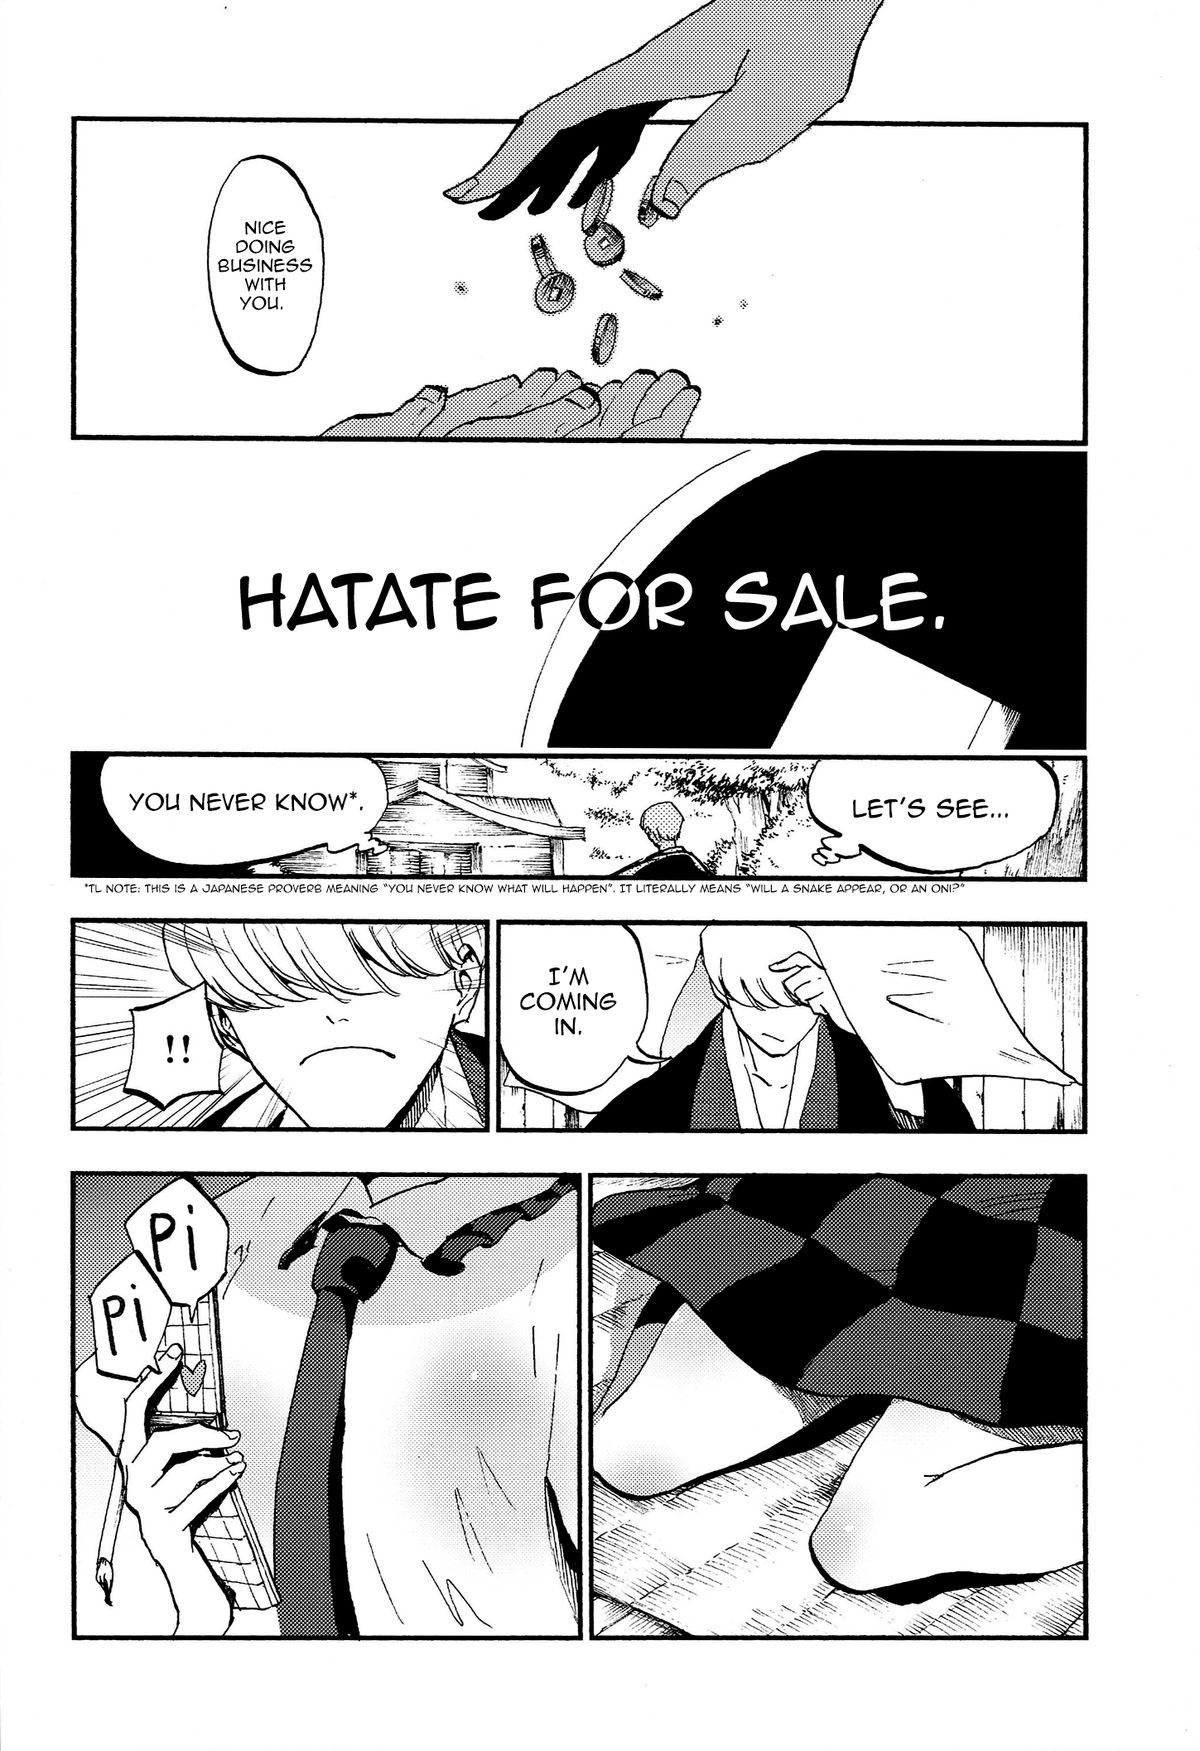 Monster Cock Hatate Urimasu | Hatate For Sale - Touhou project Reality Porn - Page 4